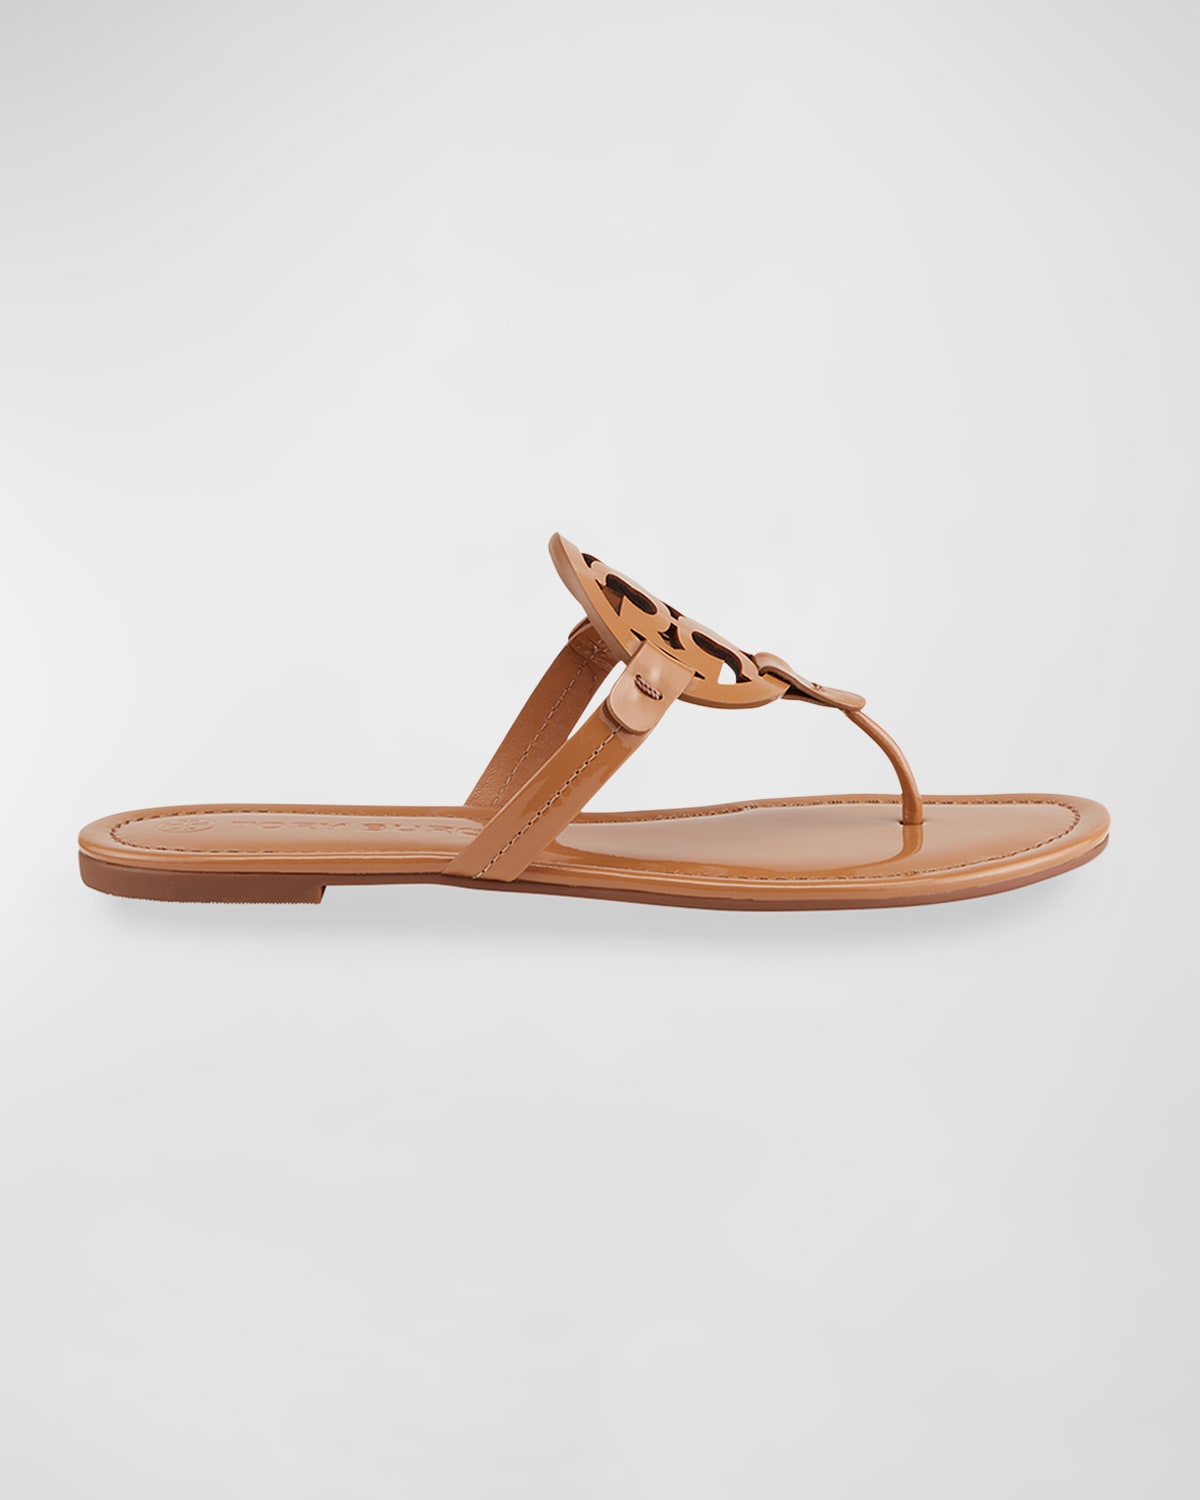 Tory Burch Miller Patent Leather Sandals | Neiman Marcus